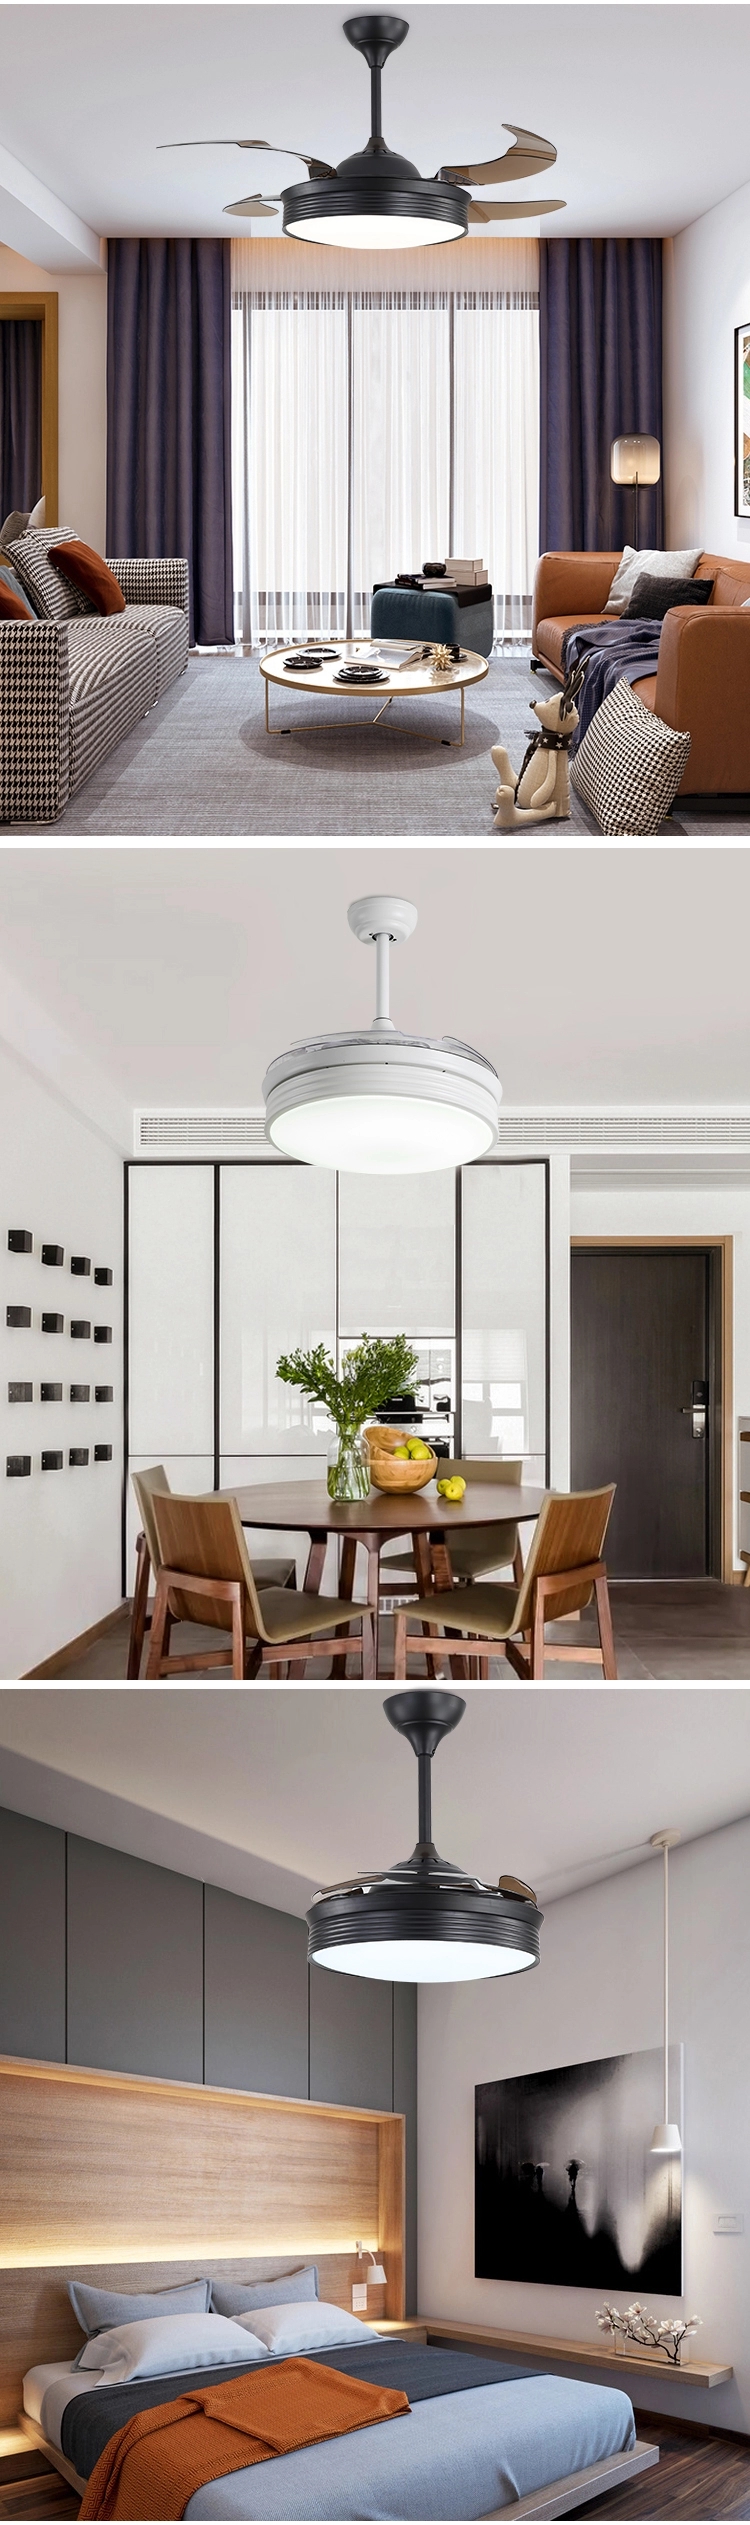 new style ceiling fans